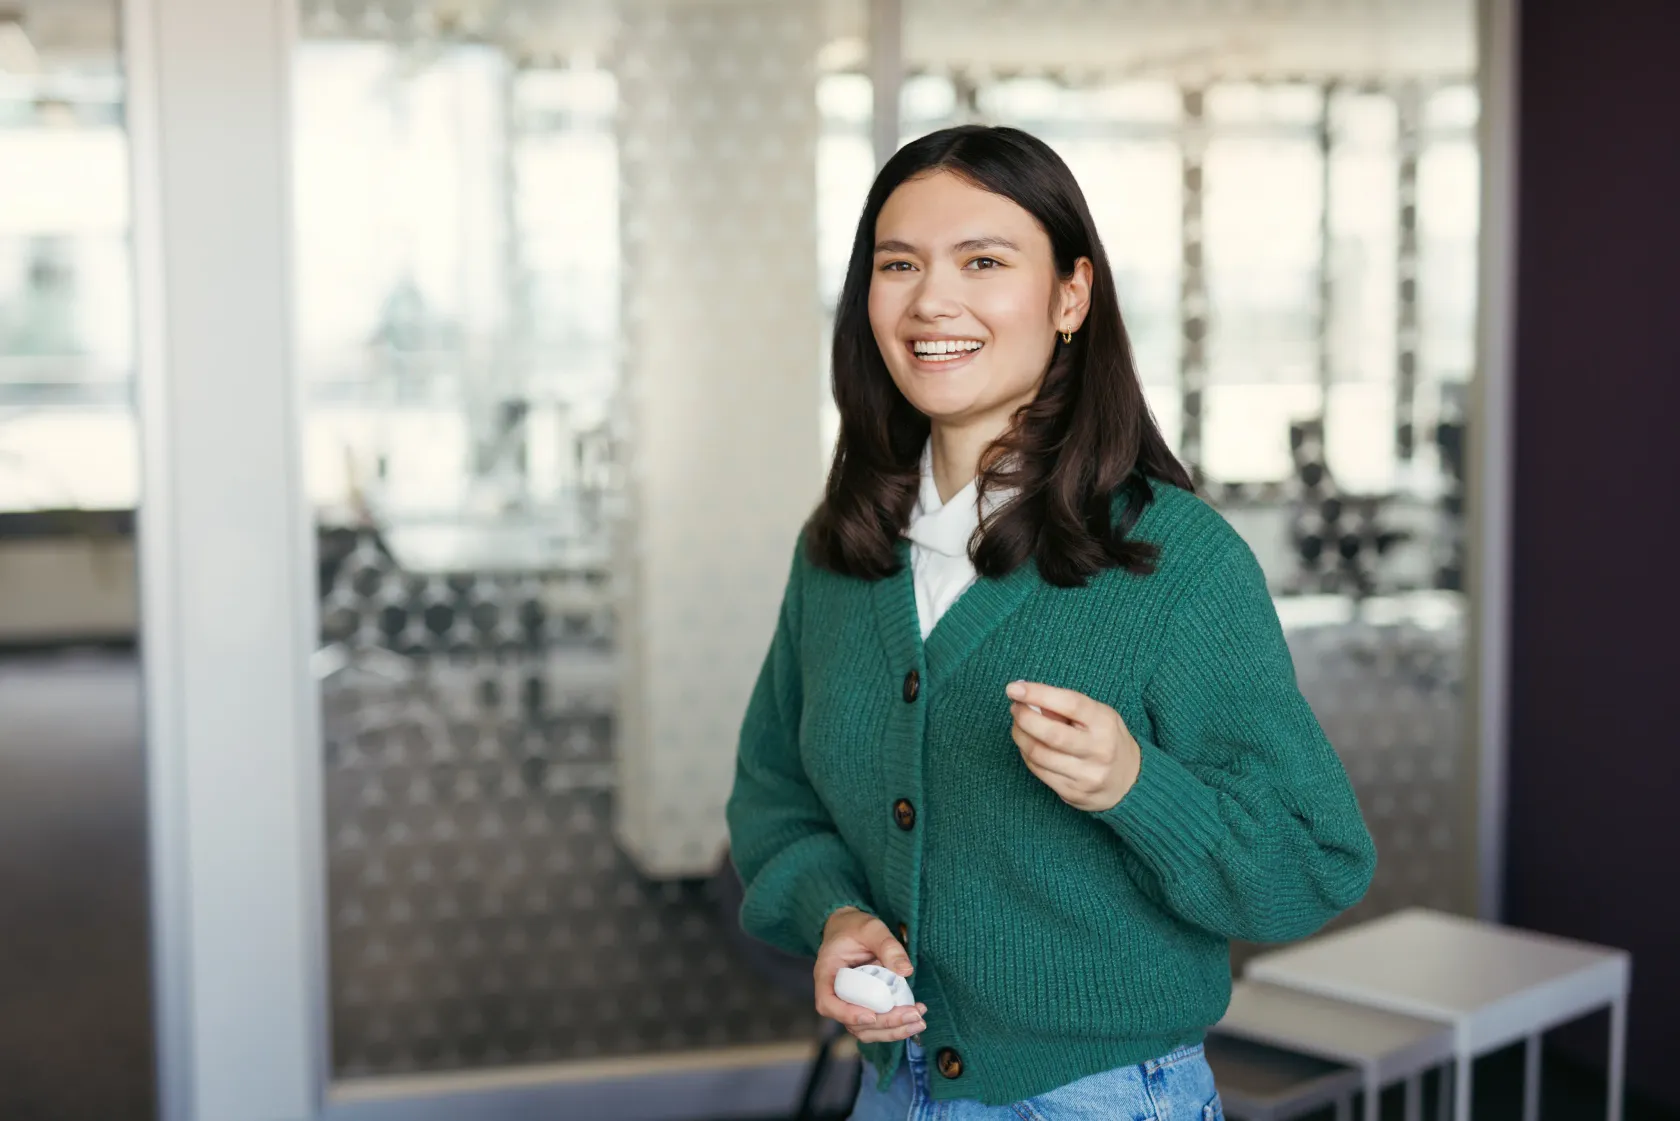 Portrait of a female colleague with green cardigan